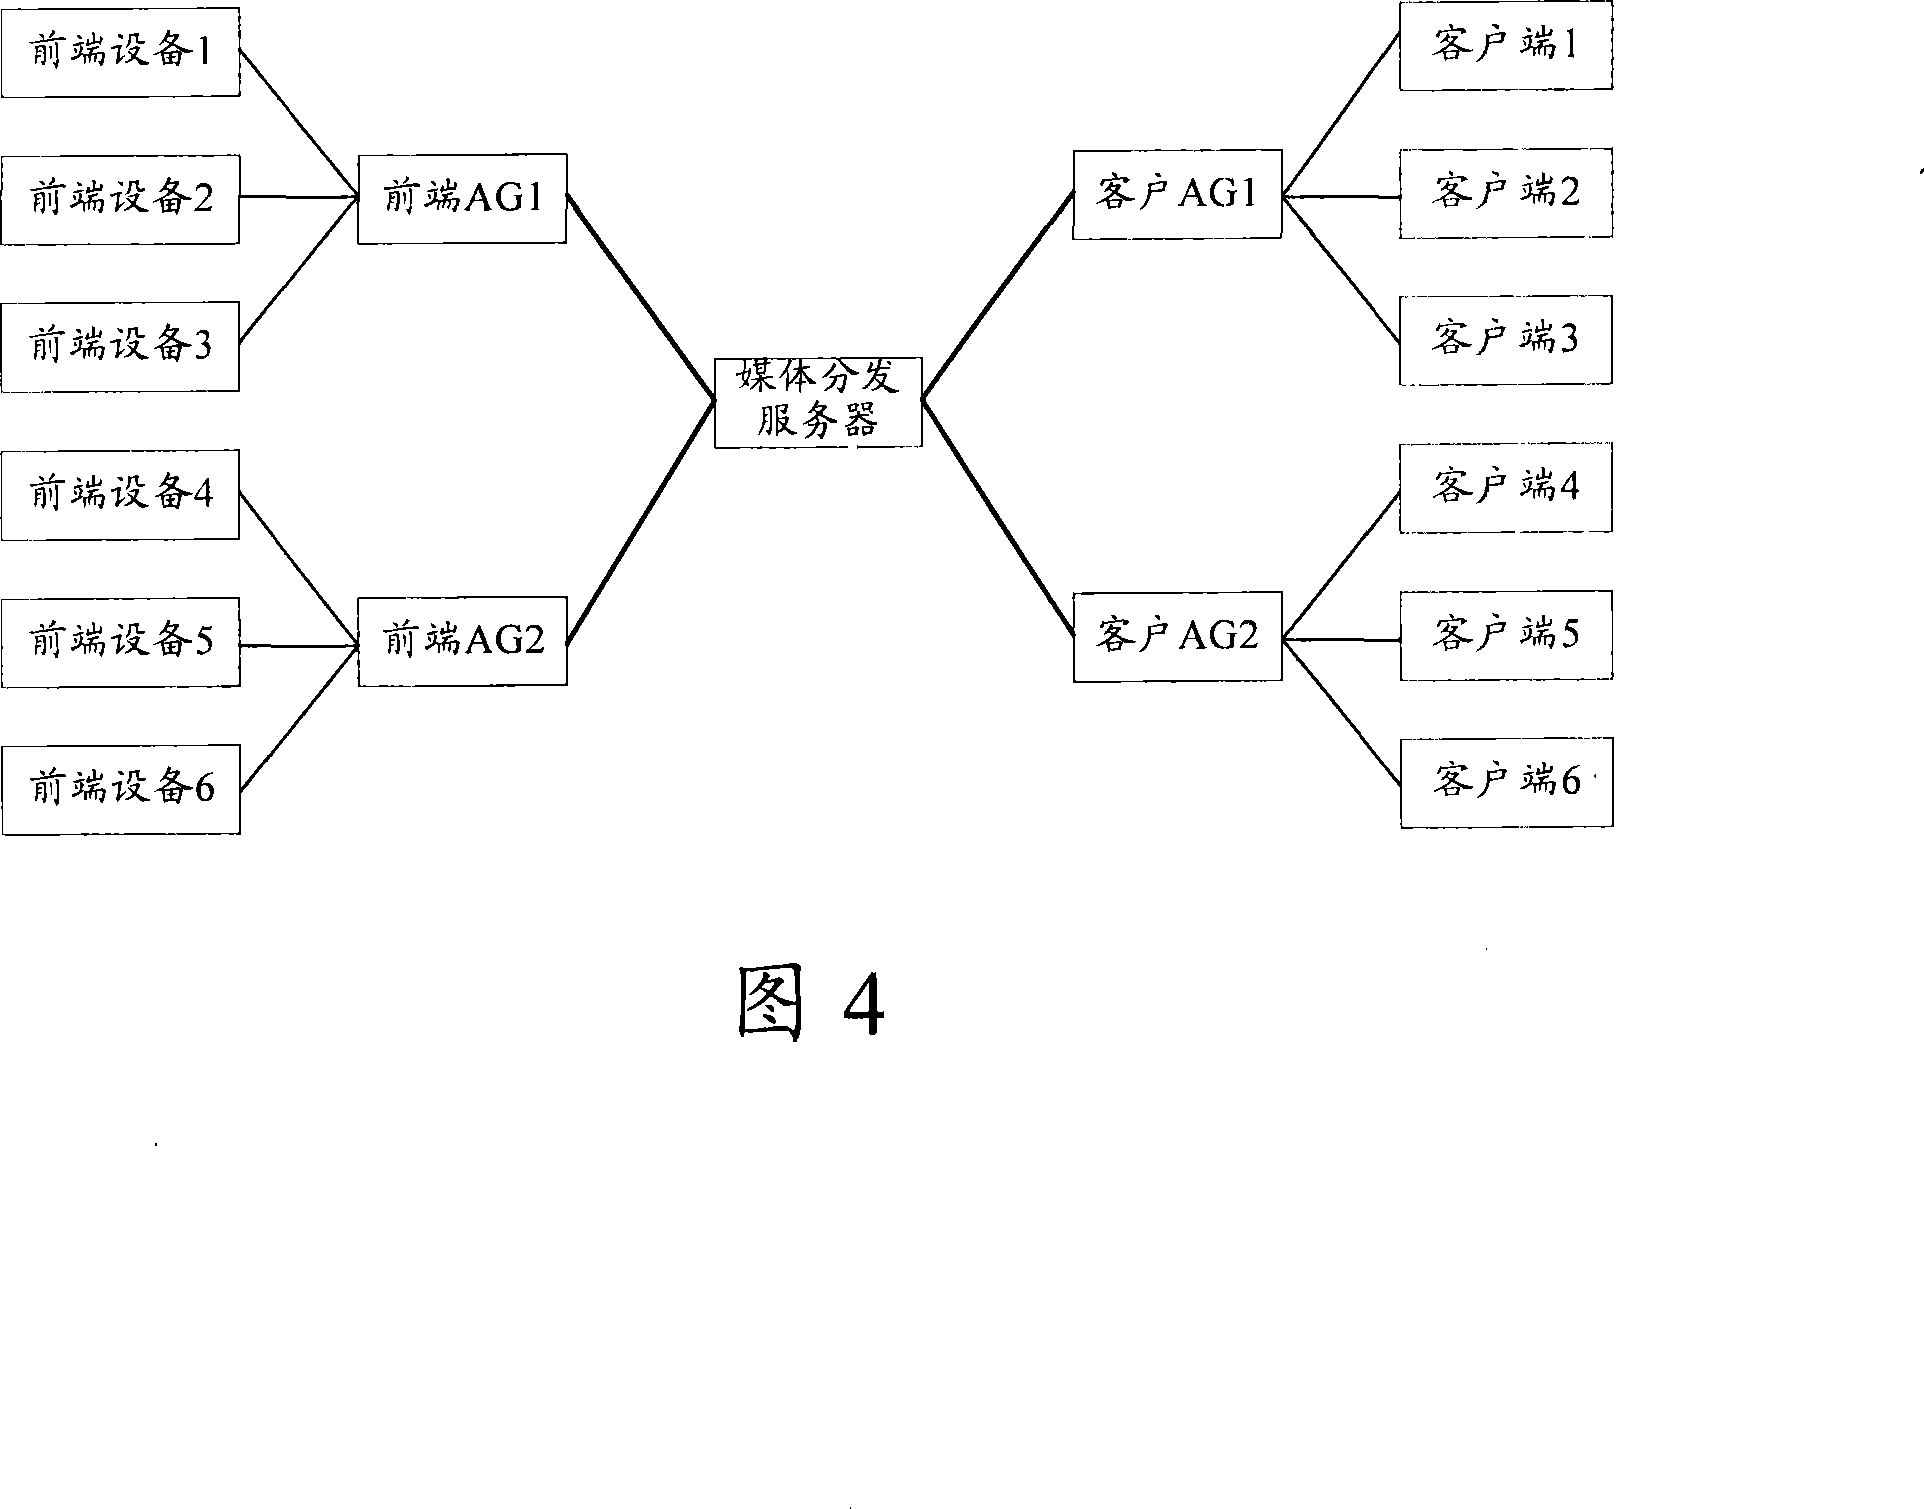 Apparatus and method for regulating service quality of real time business